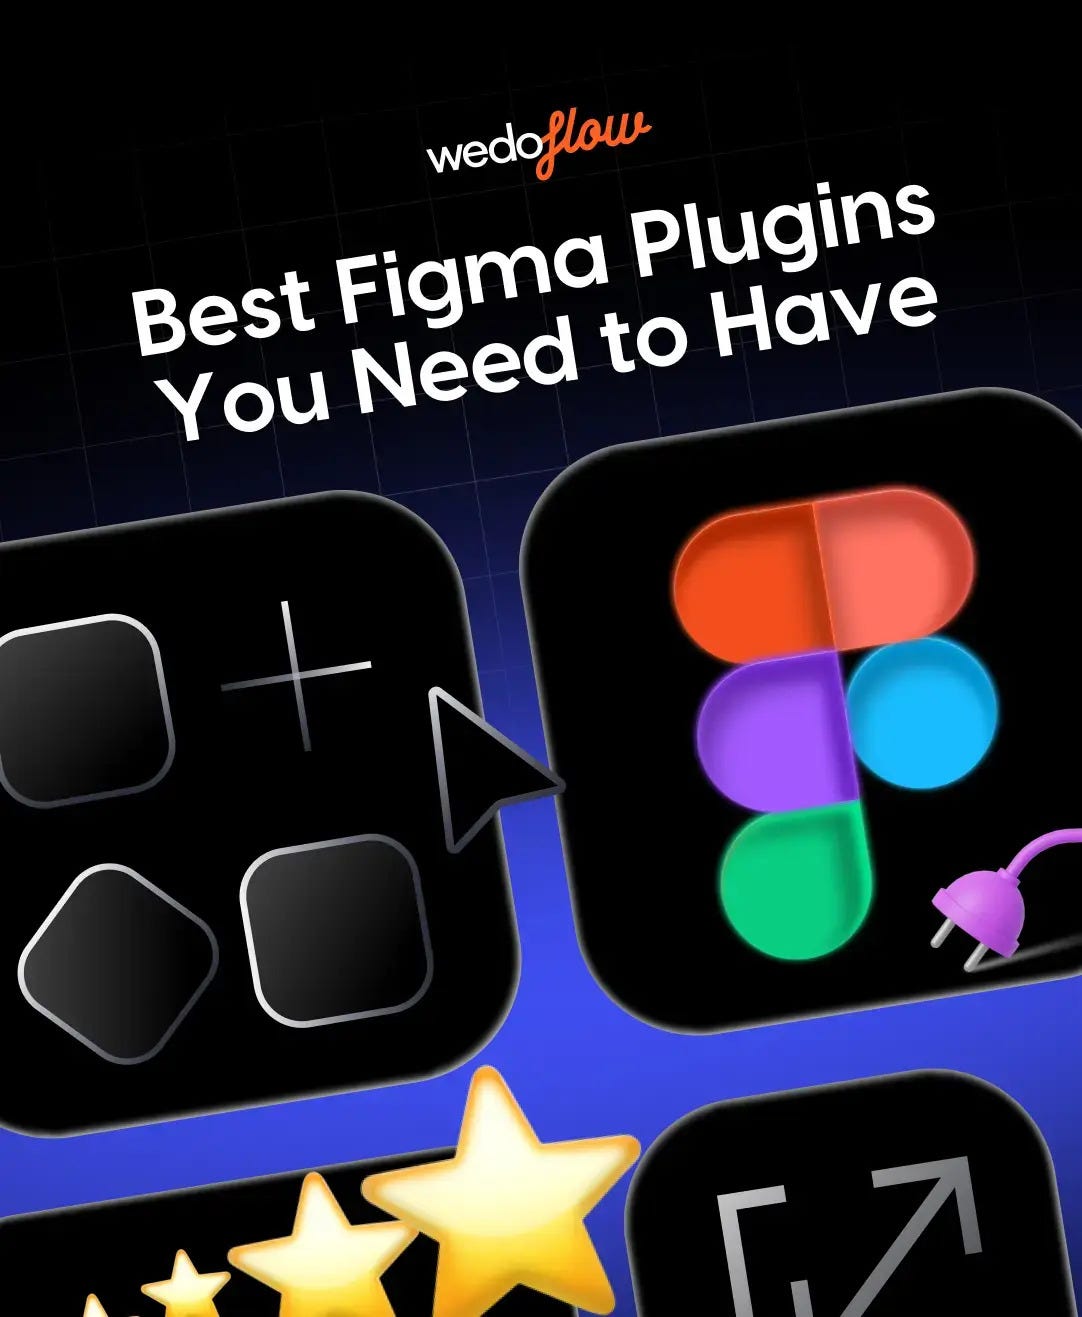 Best Figma plugins you need to have — article image header